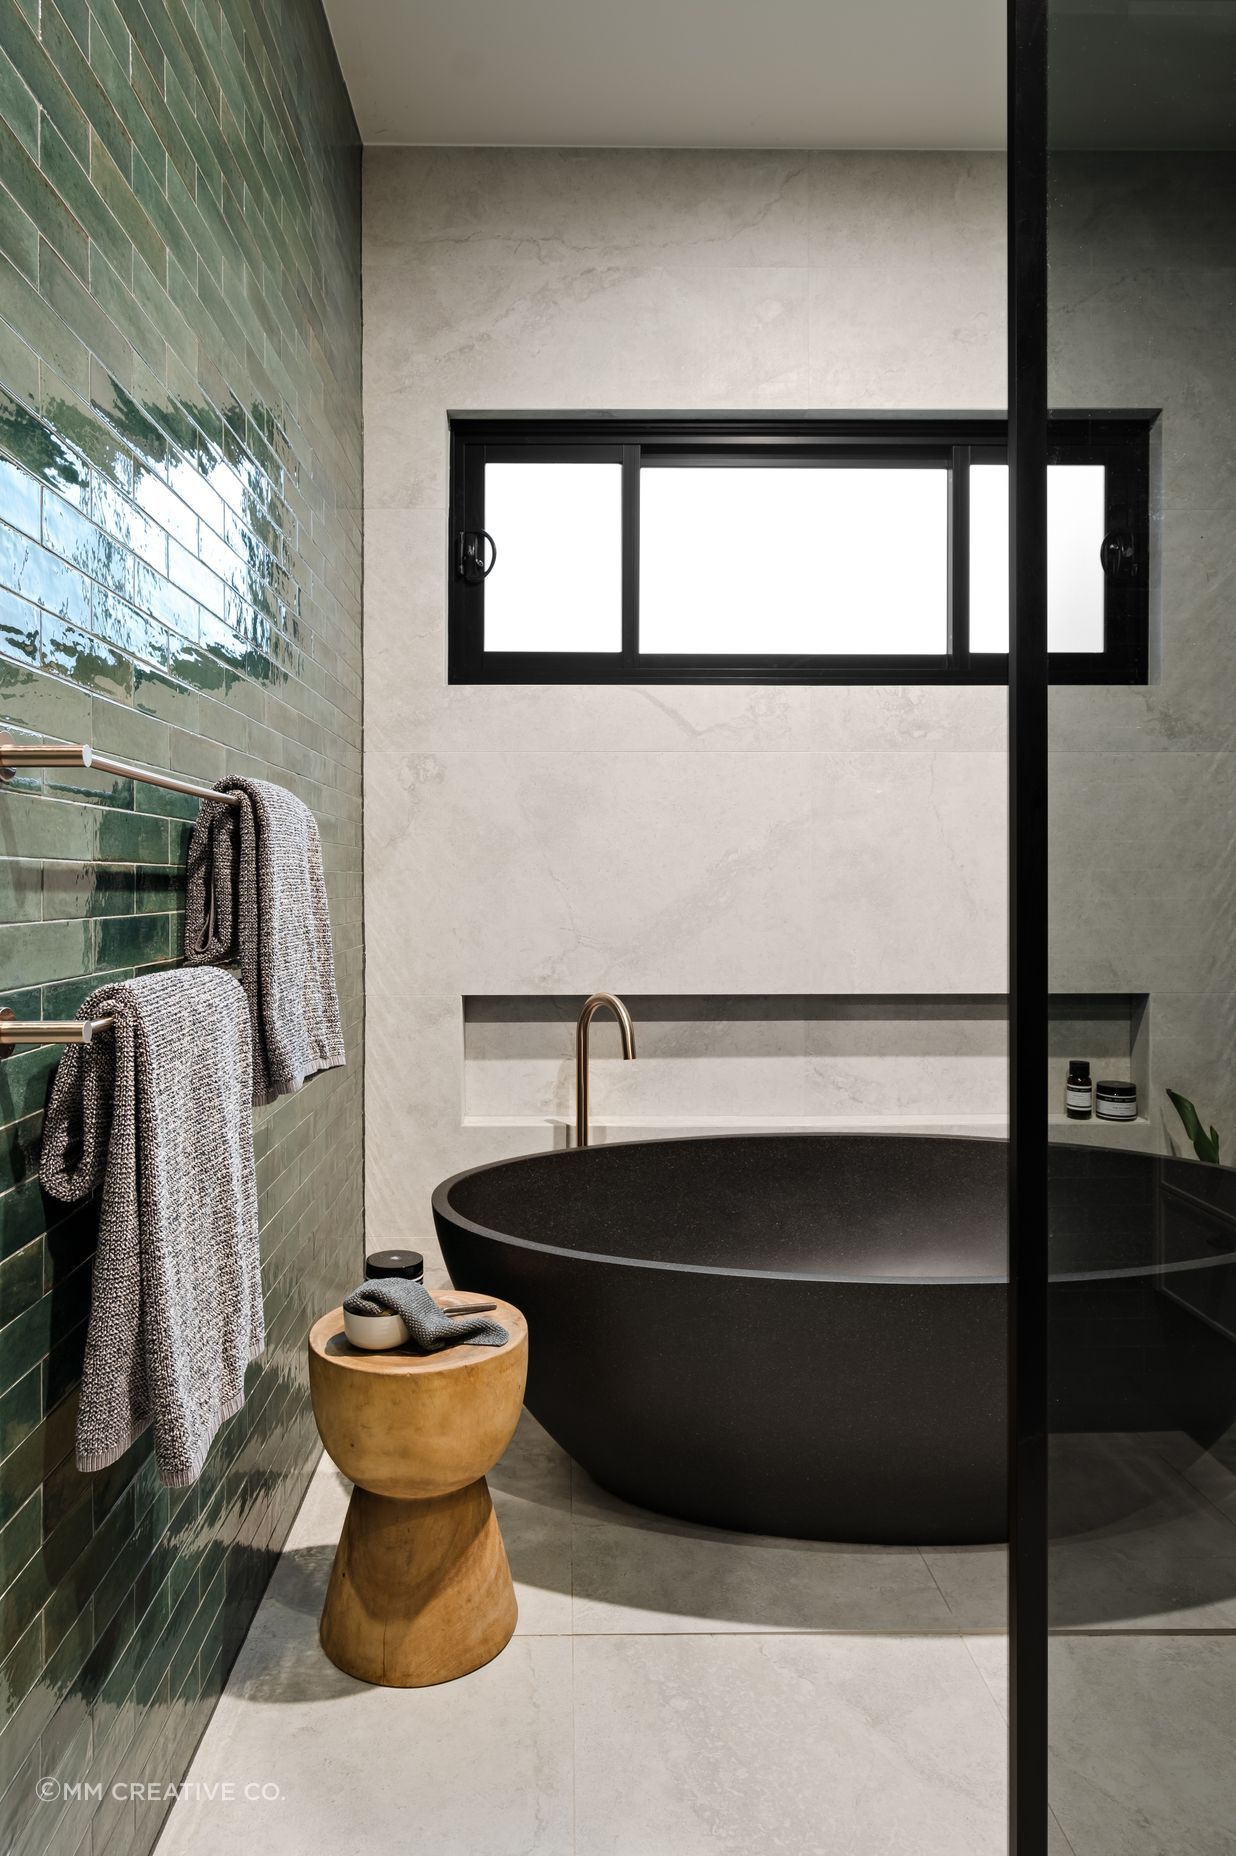 The beautiful black stone bath is a feature of the family bathroom.